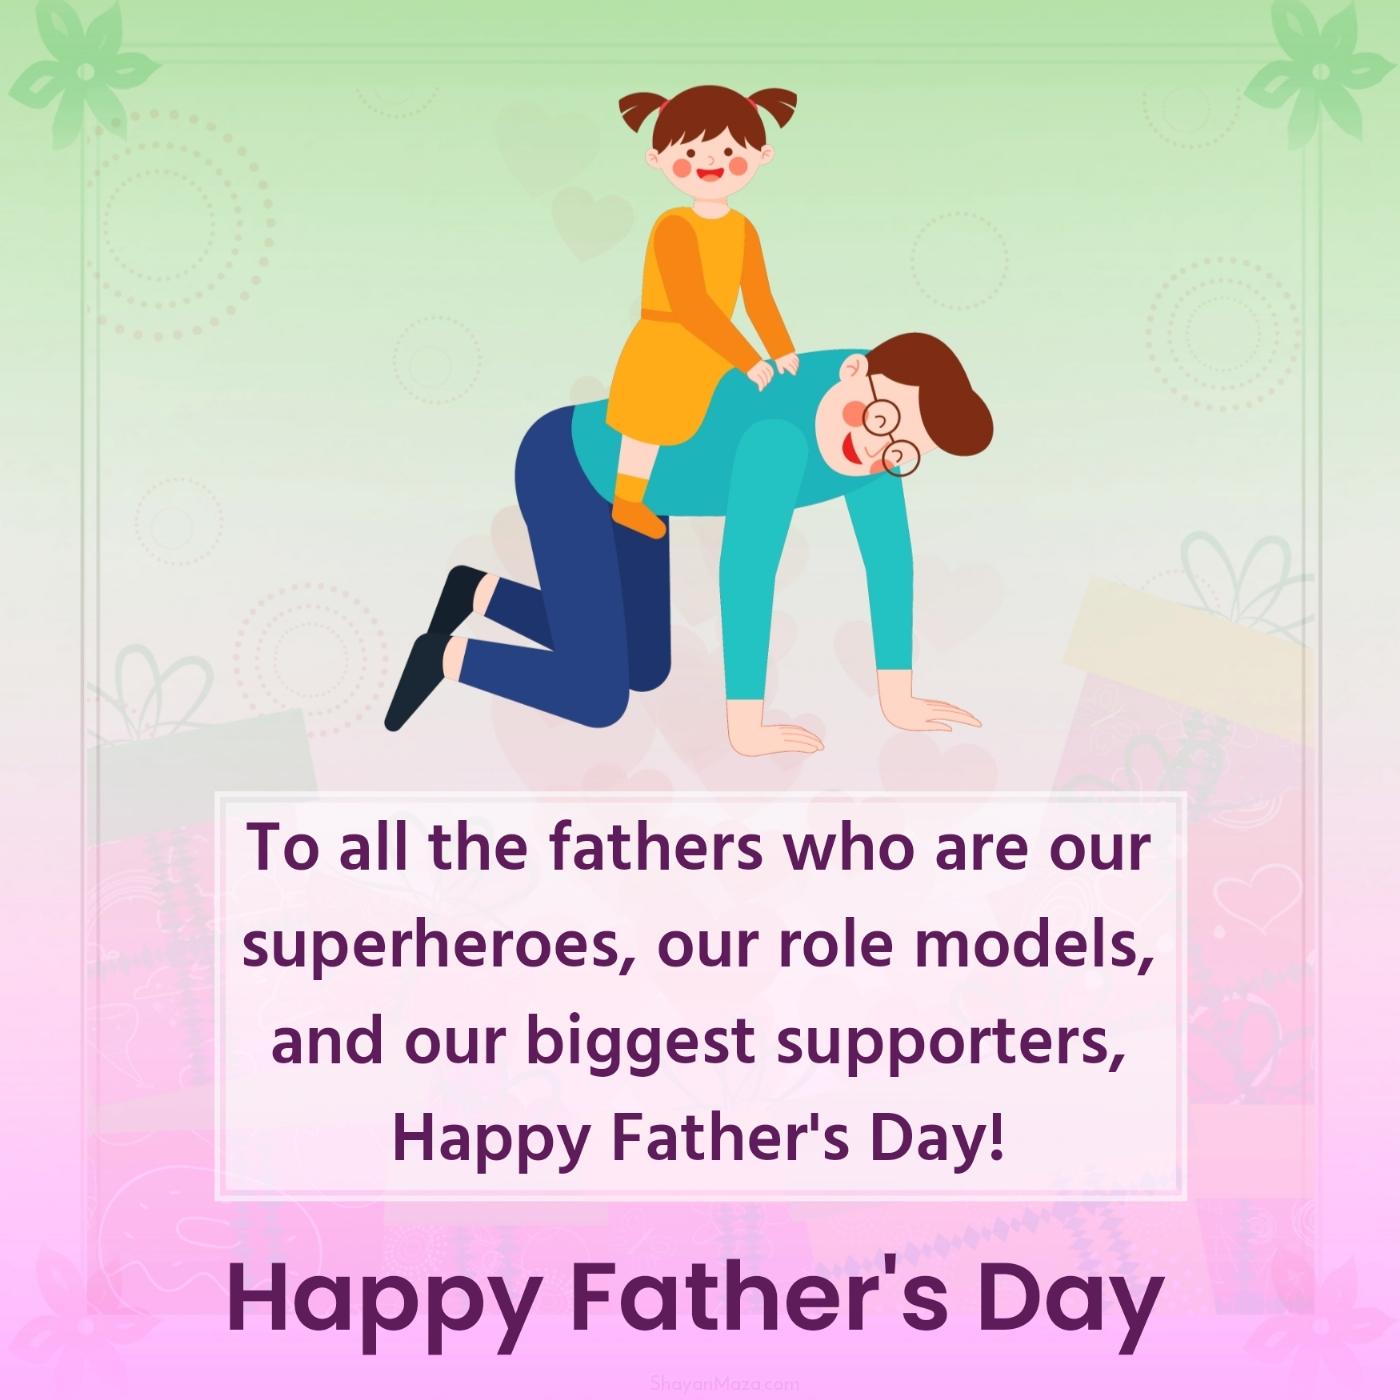 To all the fathers who are our superheroes our role models